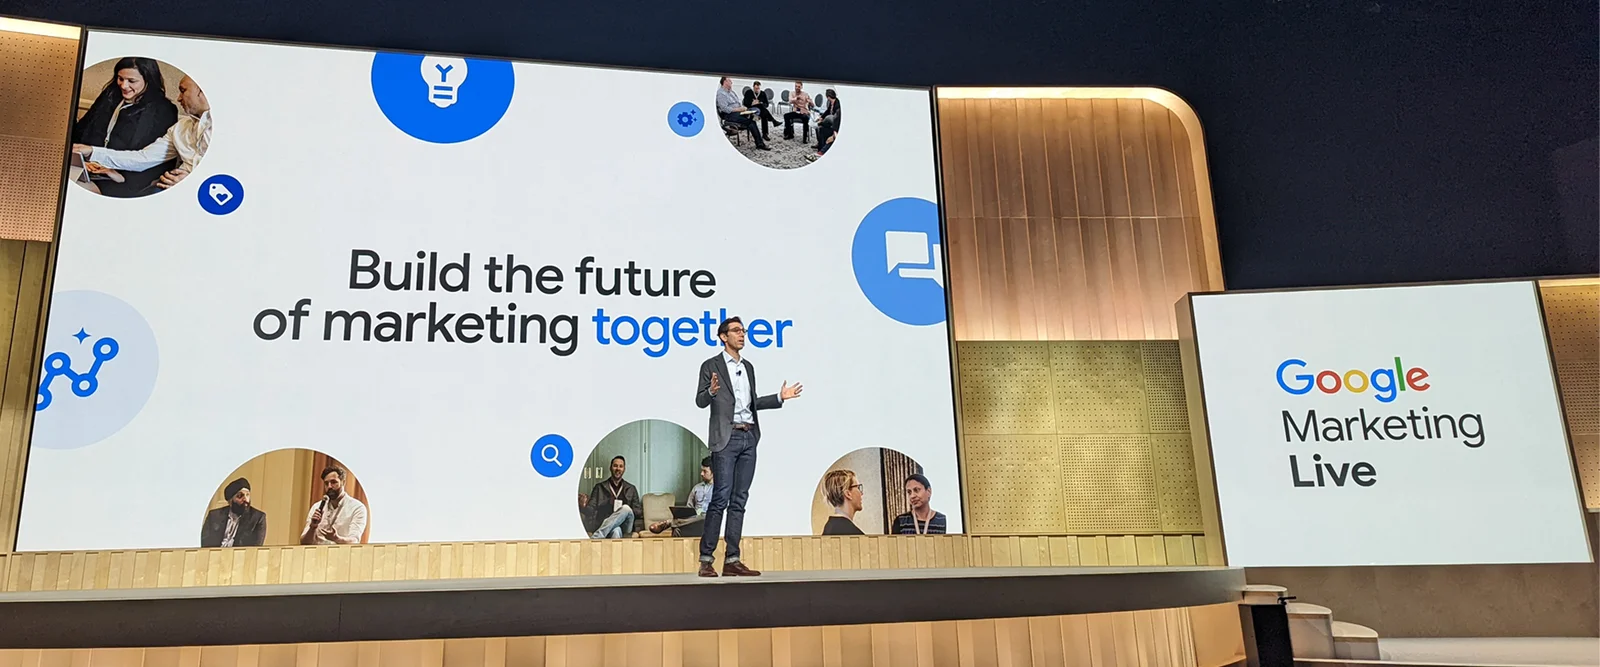 Google's UVP (unique value proposition) expressed during their marketing conference